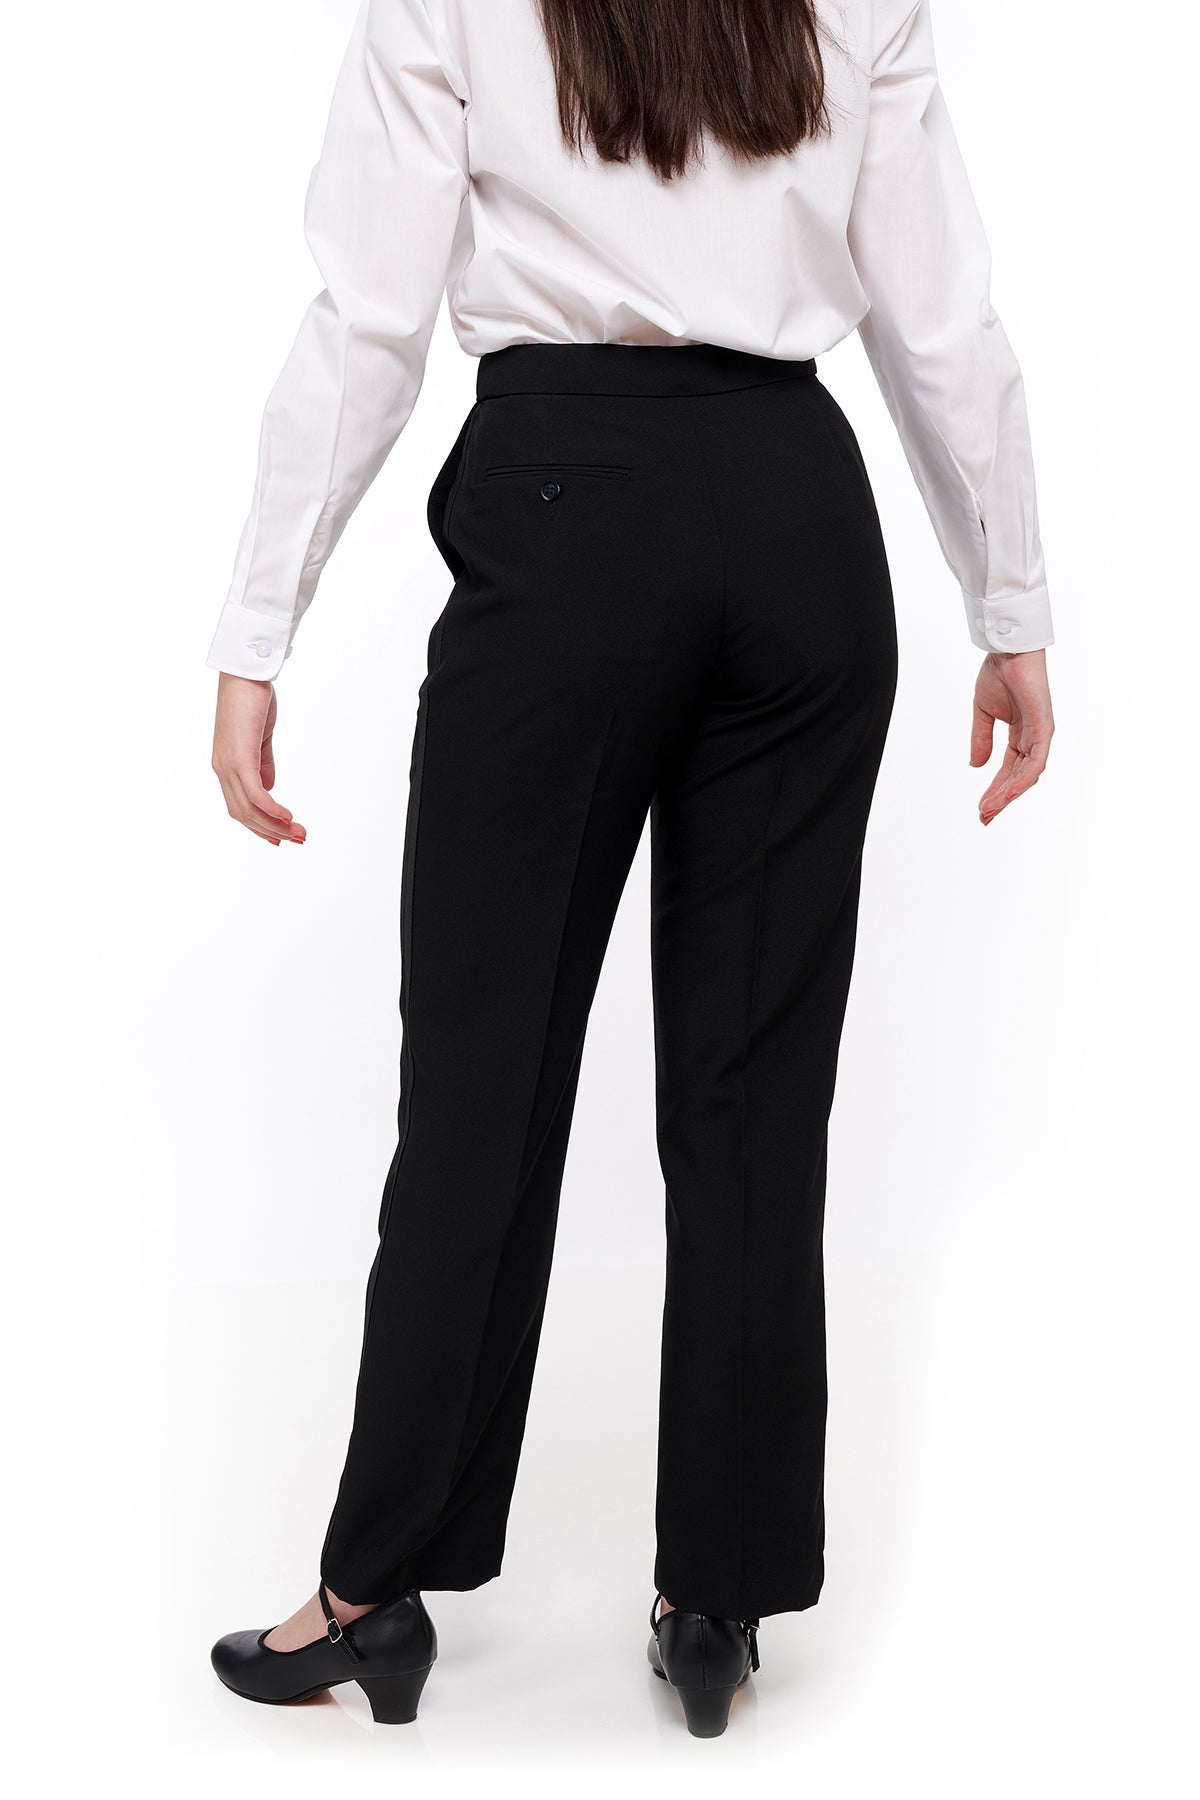 Buy White Tuxedo Pants for Women on sale  Marie Claire Edit